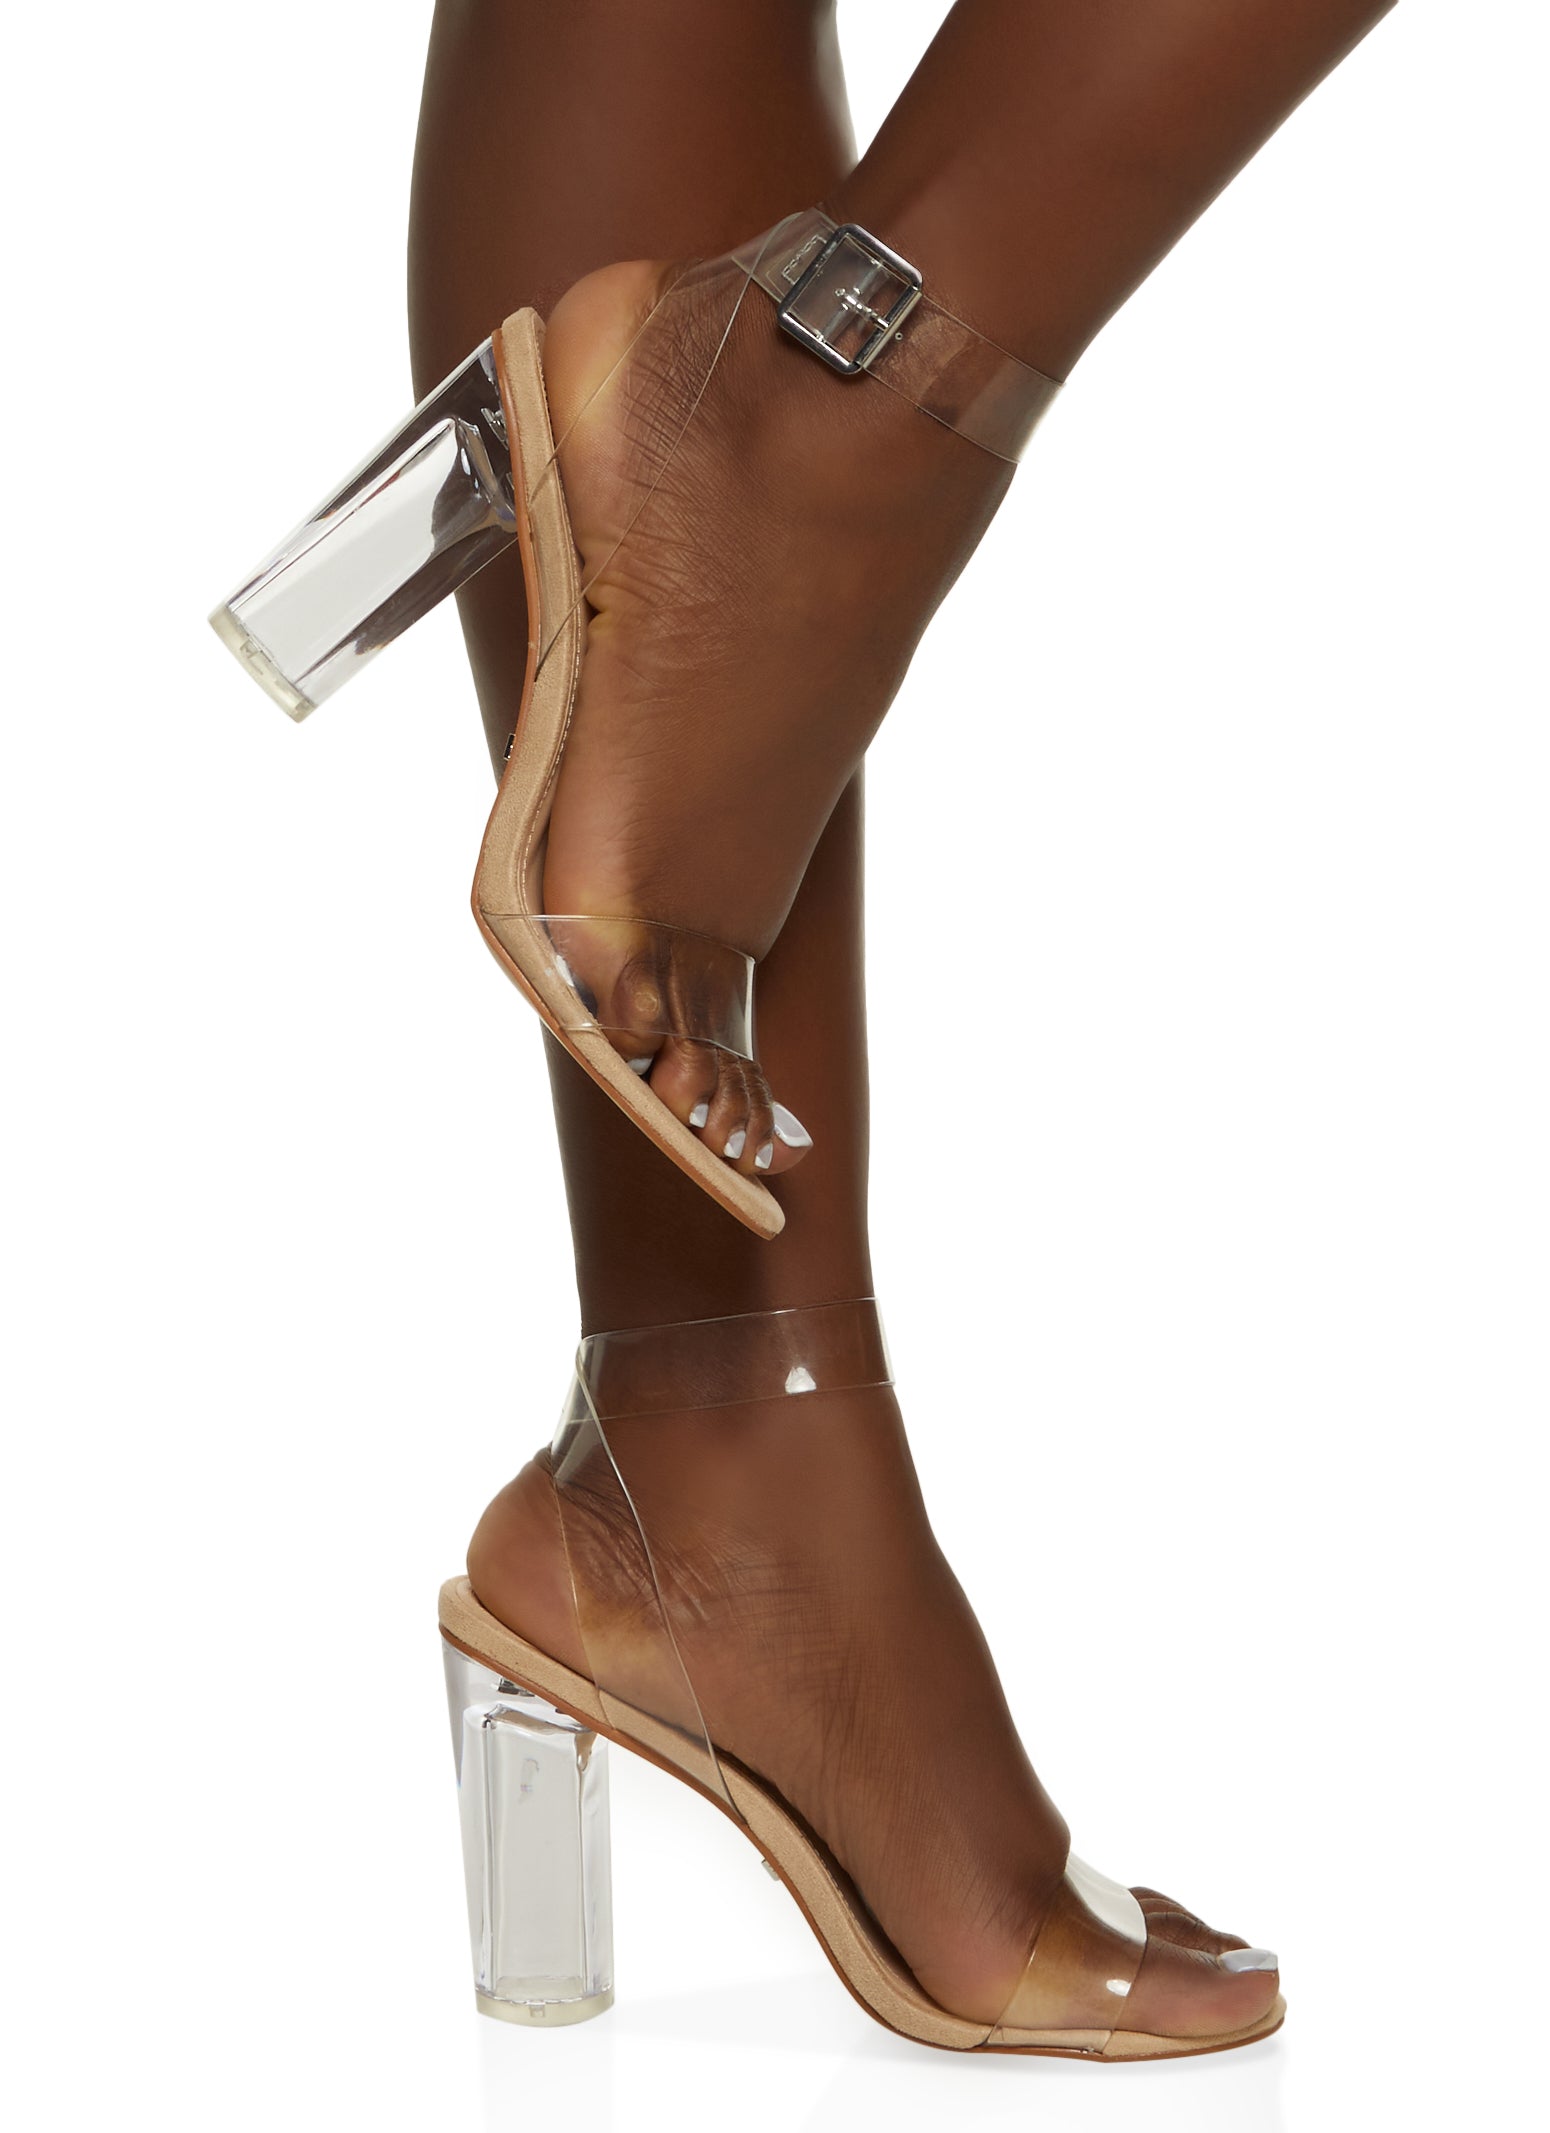 The Roma Heel • Impressions Online Boutique